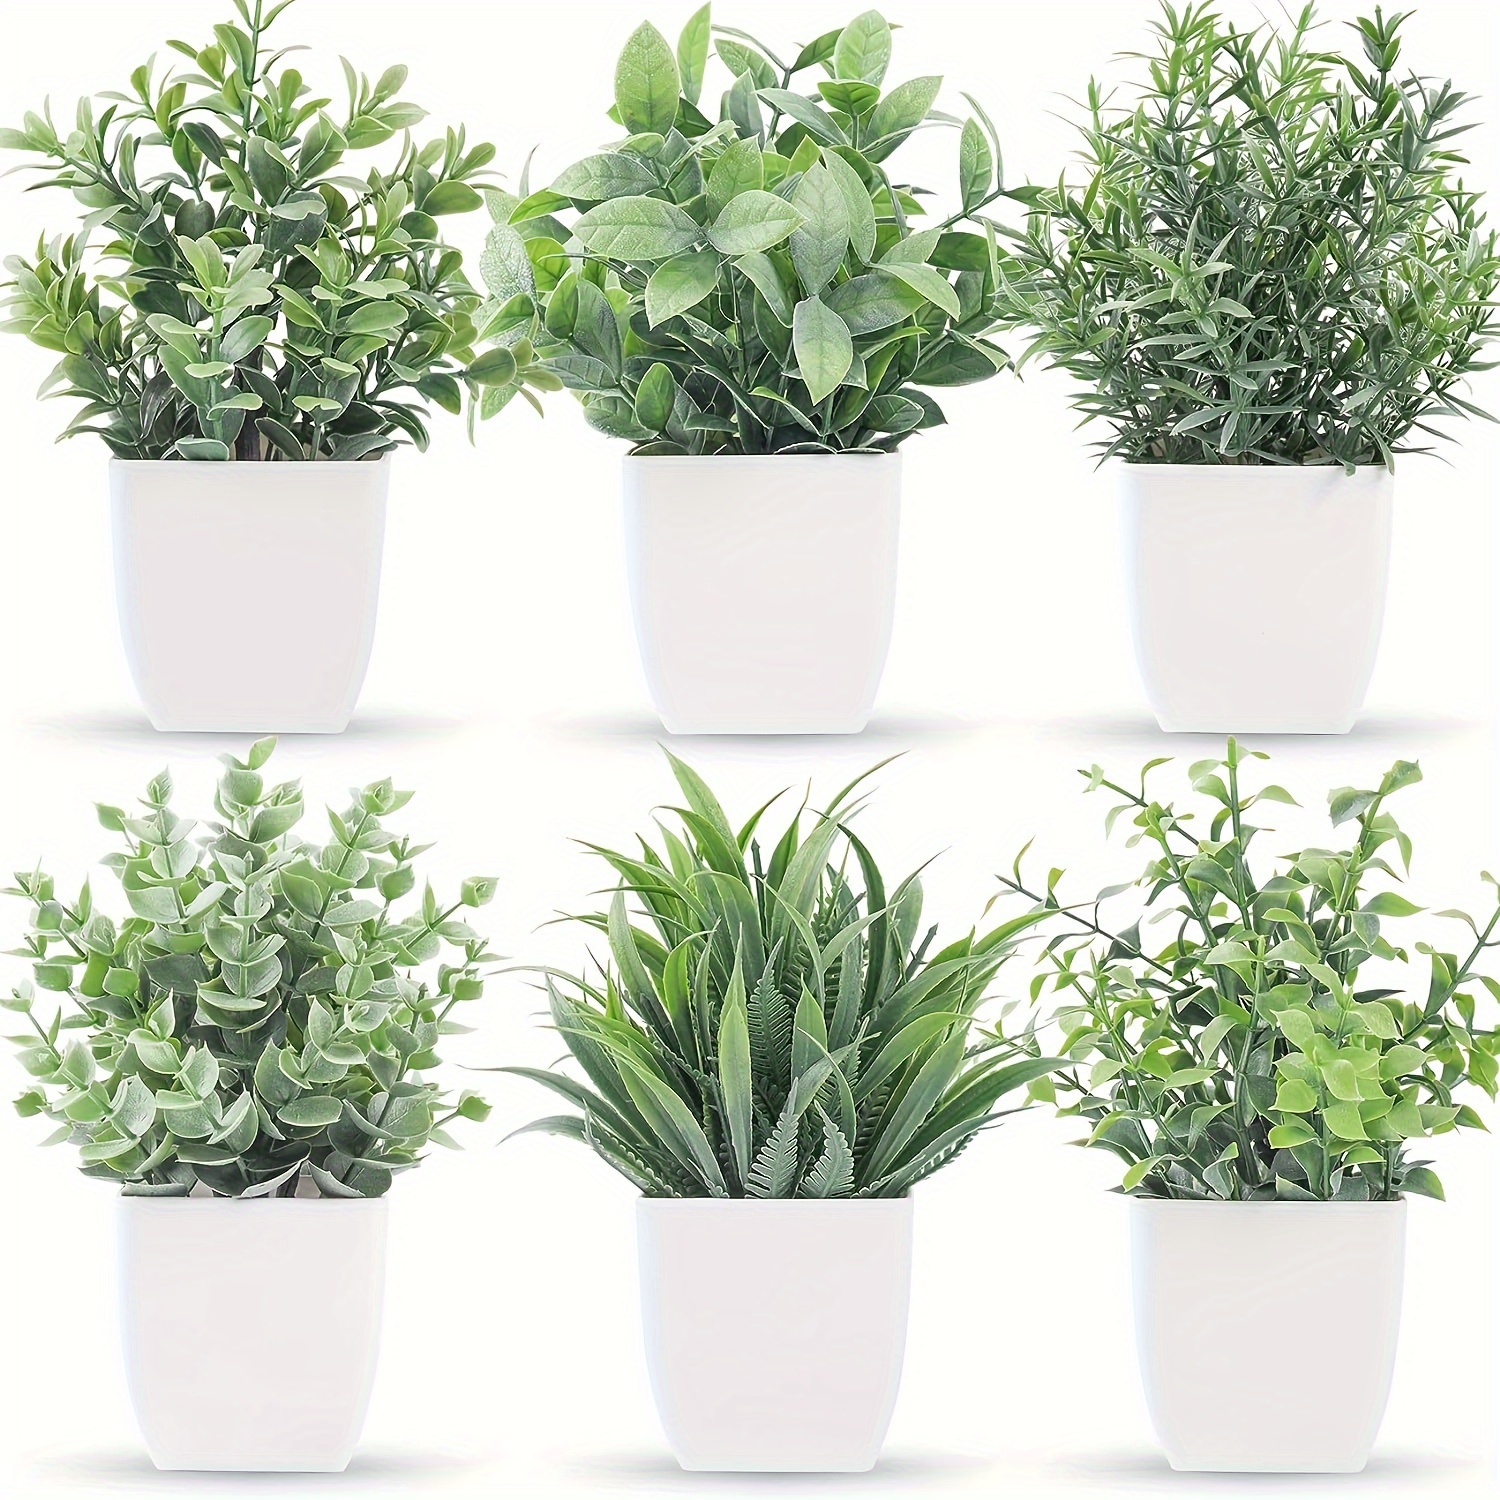 

6pcs/set 7.18in/18cm Mini Potted Fake Plants, Artificial Plants For Indoor And Outdoor Decoration, Plastic Eucalyptus Plants For Office Desk Hotel Bedroom Decor